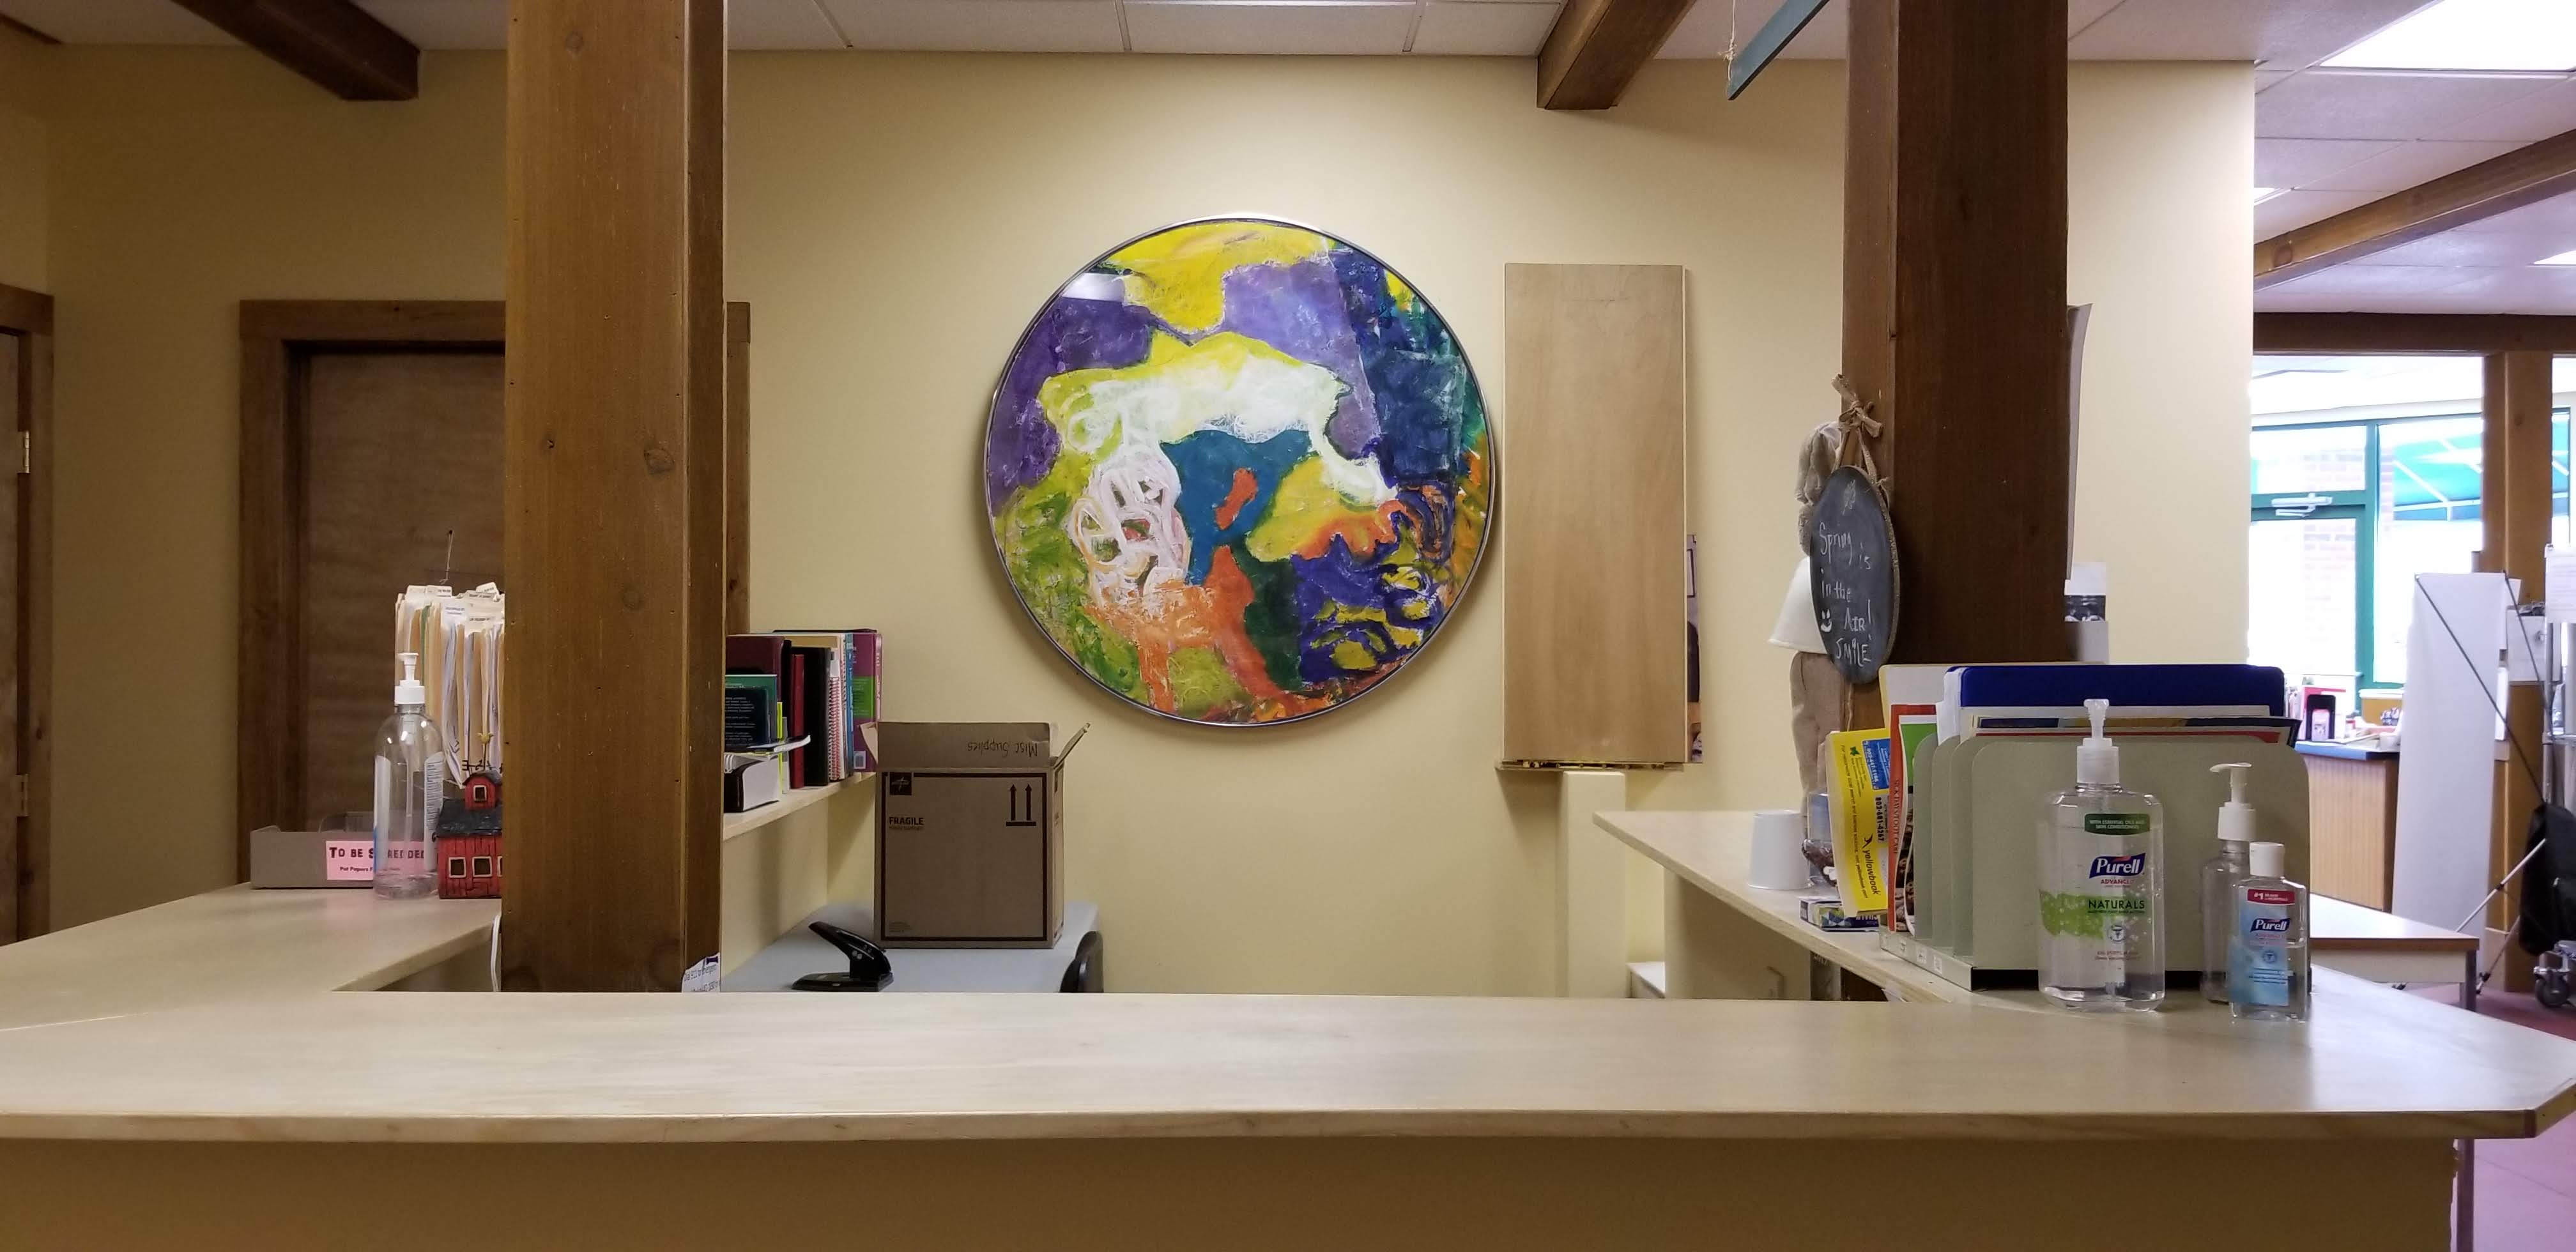 Circular oil painting over clinic check-in desk